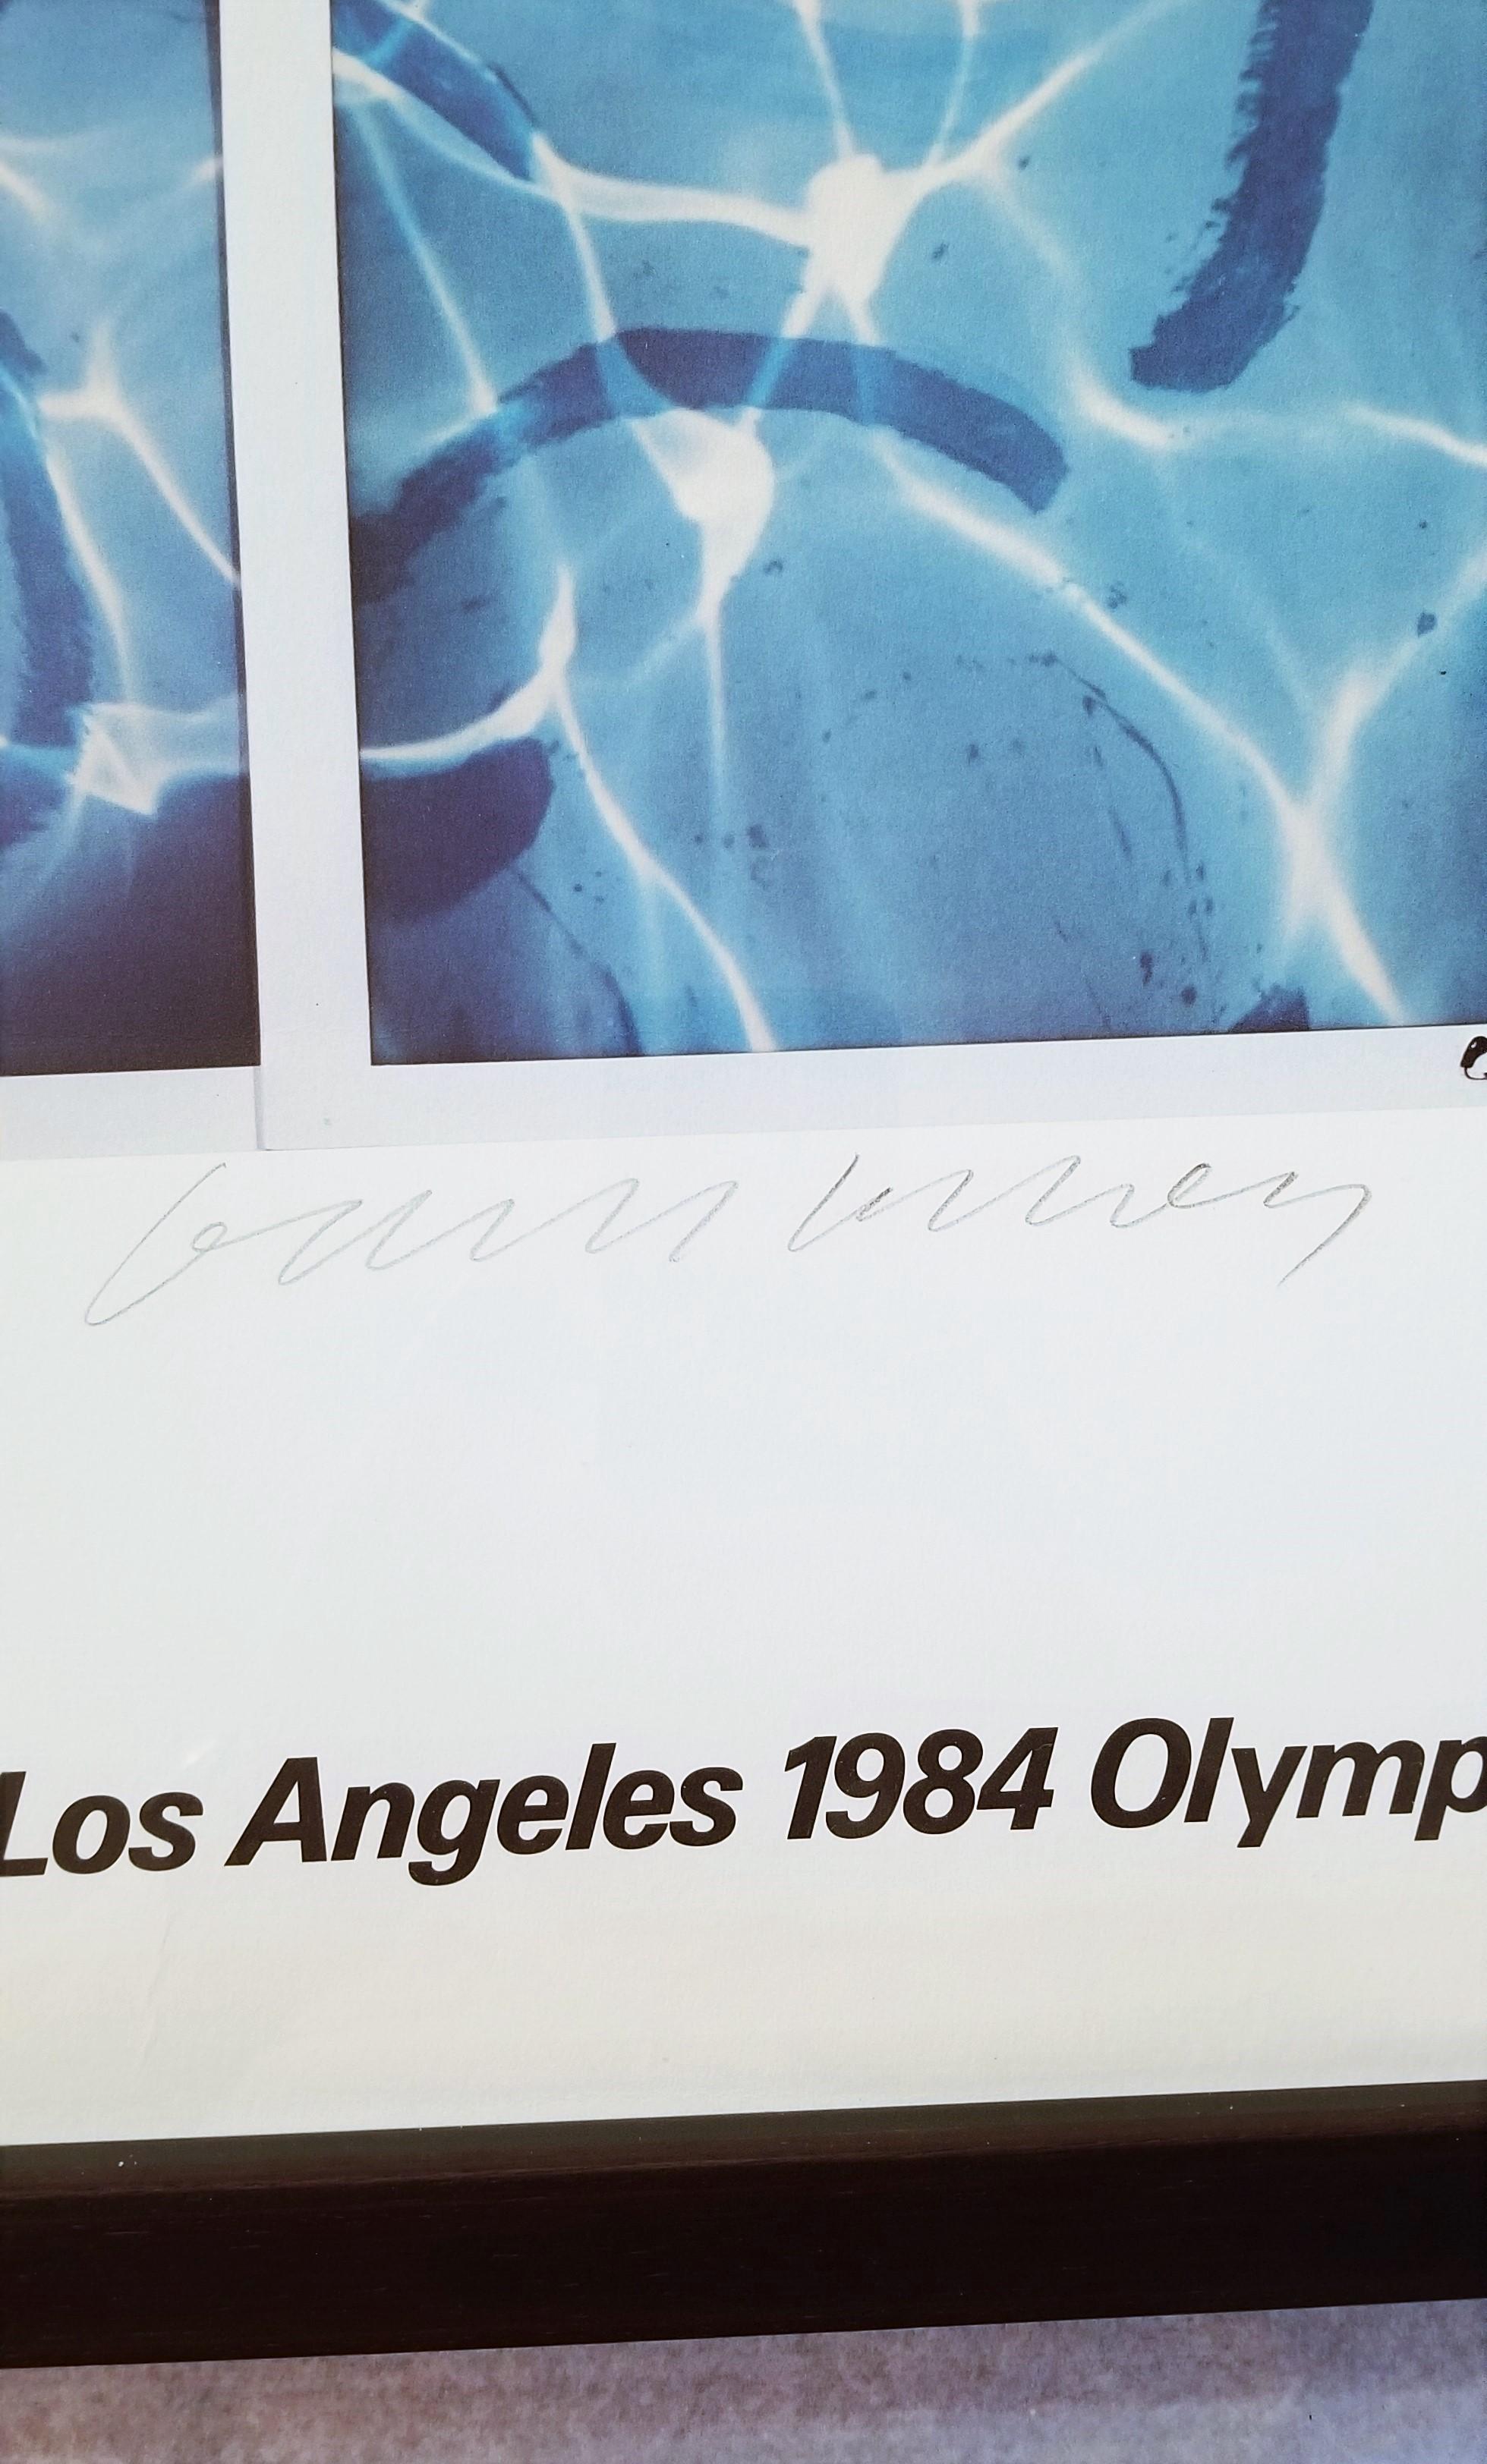 Los Angeles 1984 Olympic Games (Polaroids of Swimmer) Poster (Signed) 3